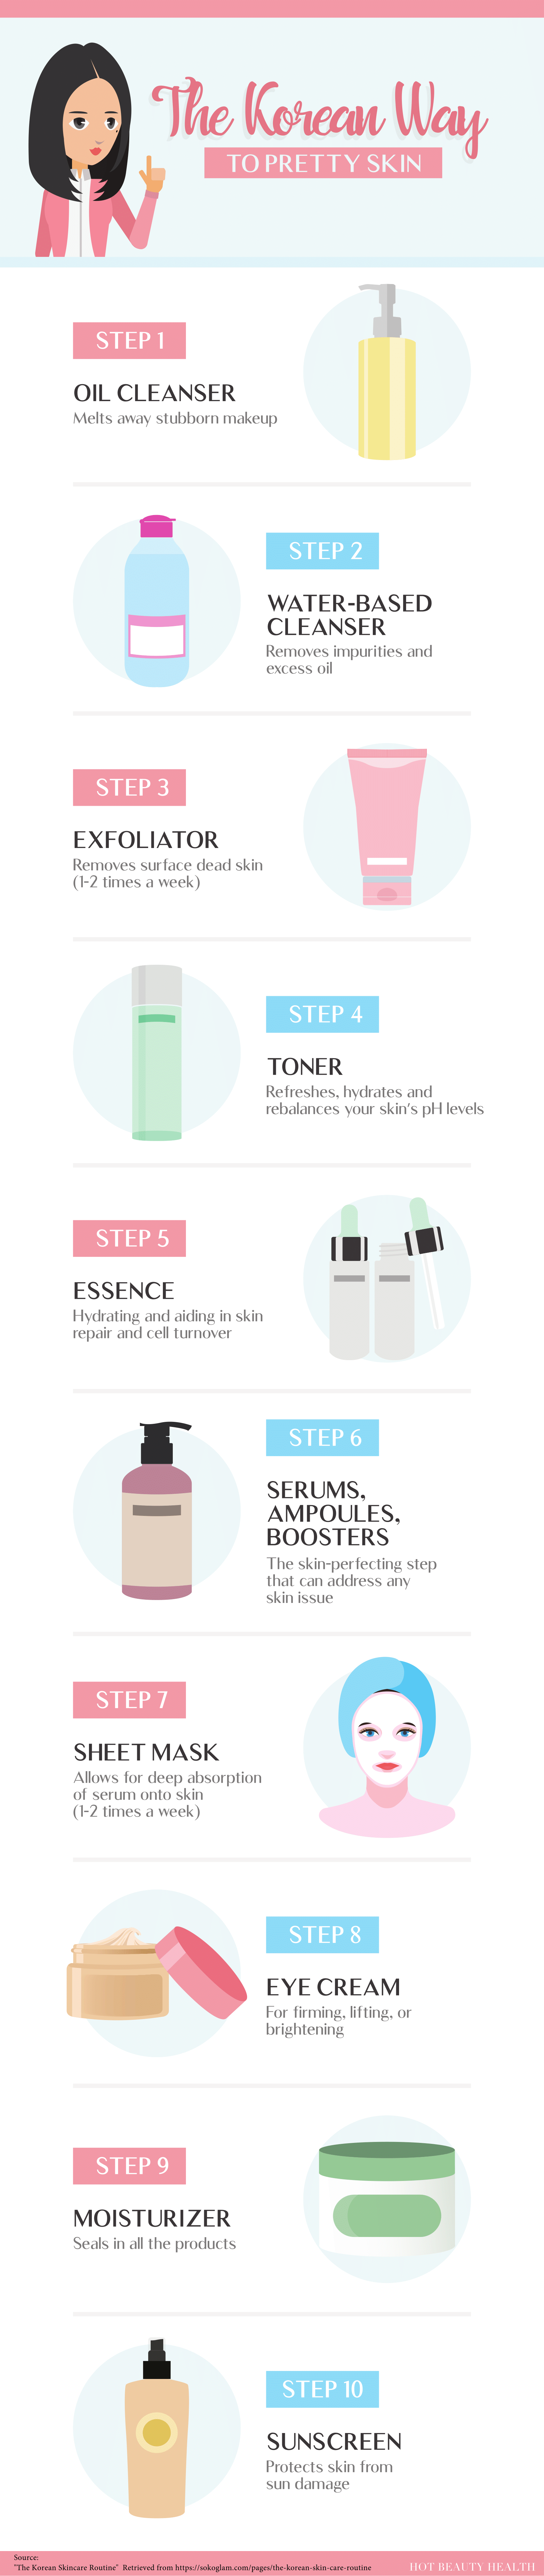 The 10 Step Korean Skincare Routine [Infographic] - Hot Beauty Health